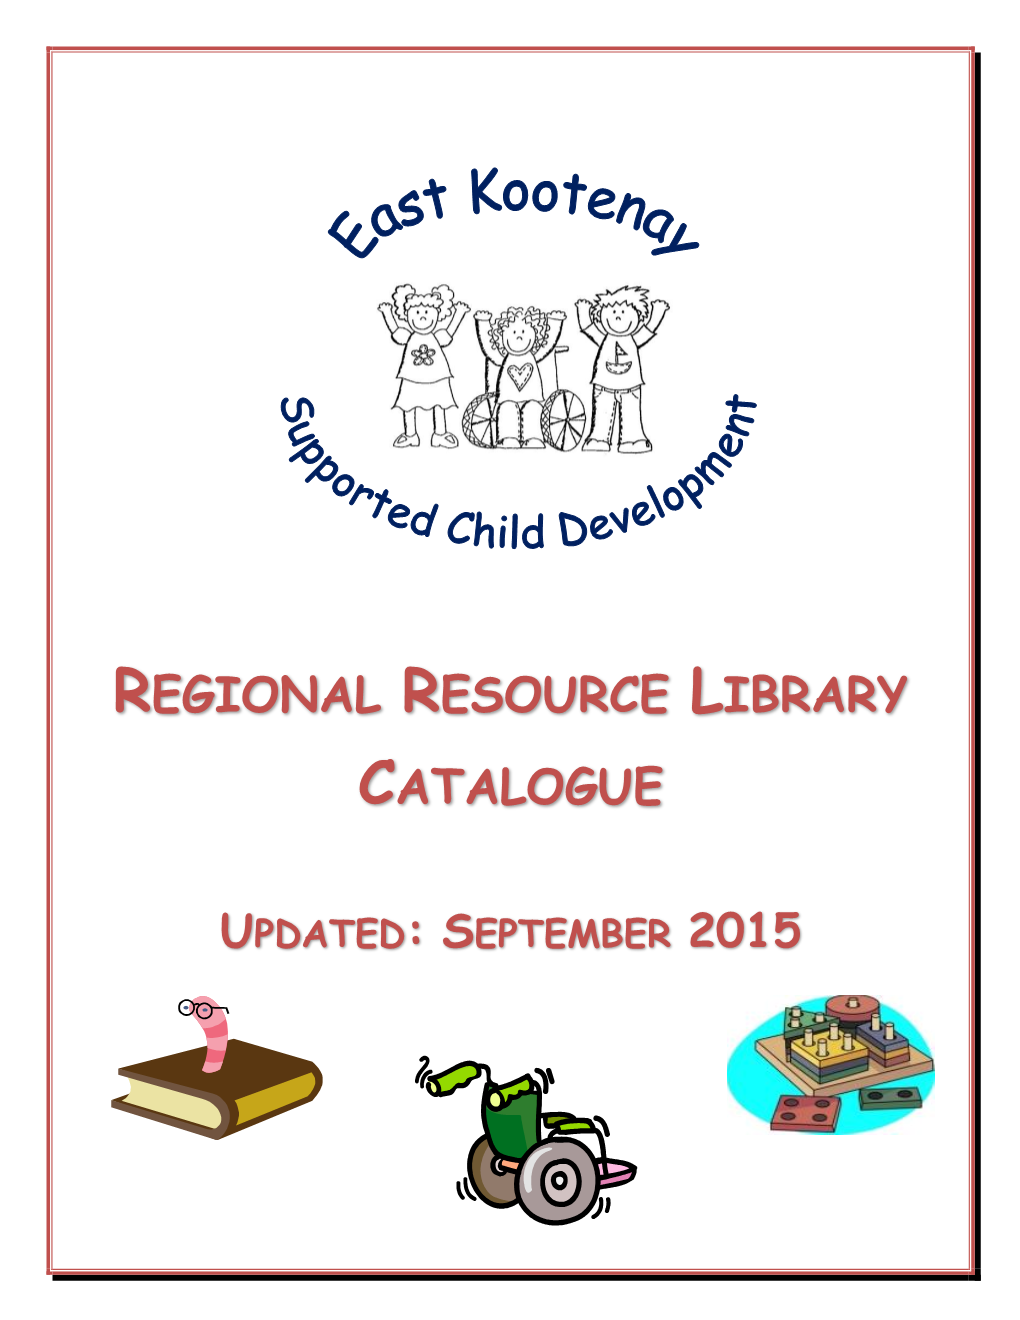 Regional Resource Library Catalogue